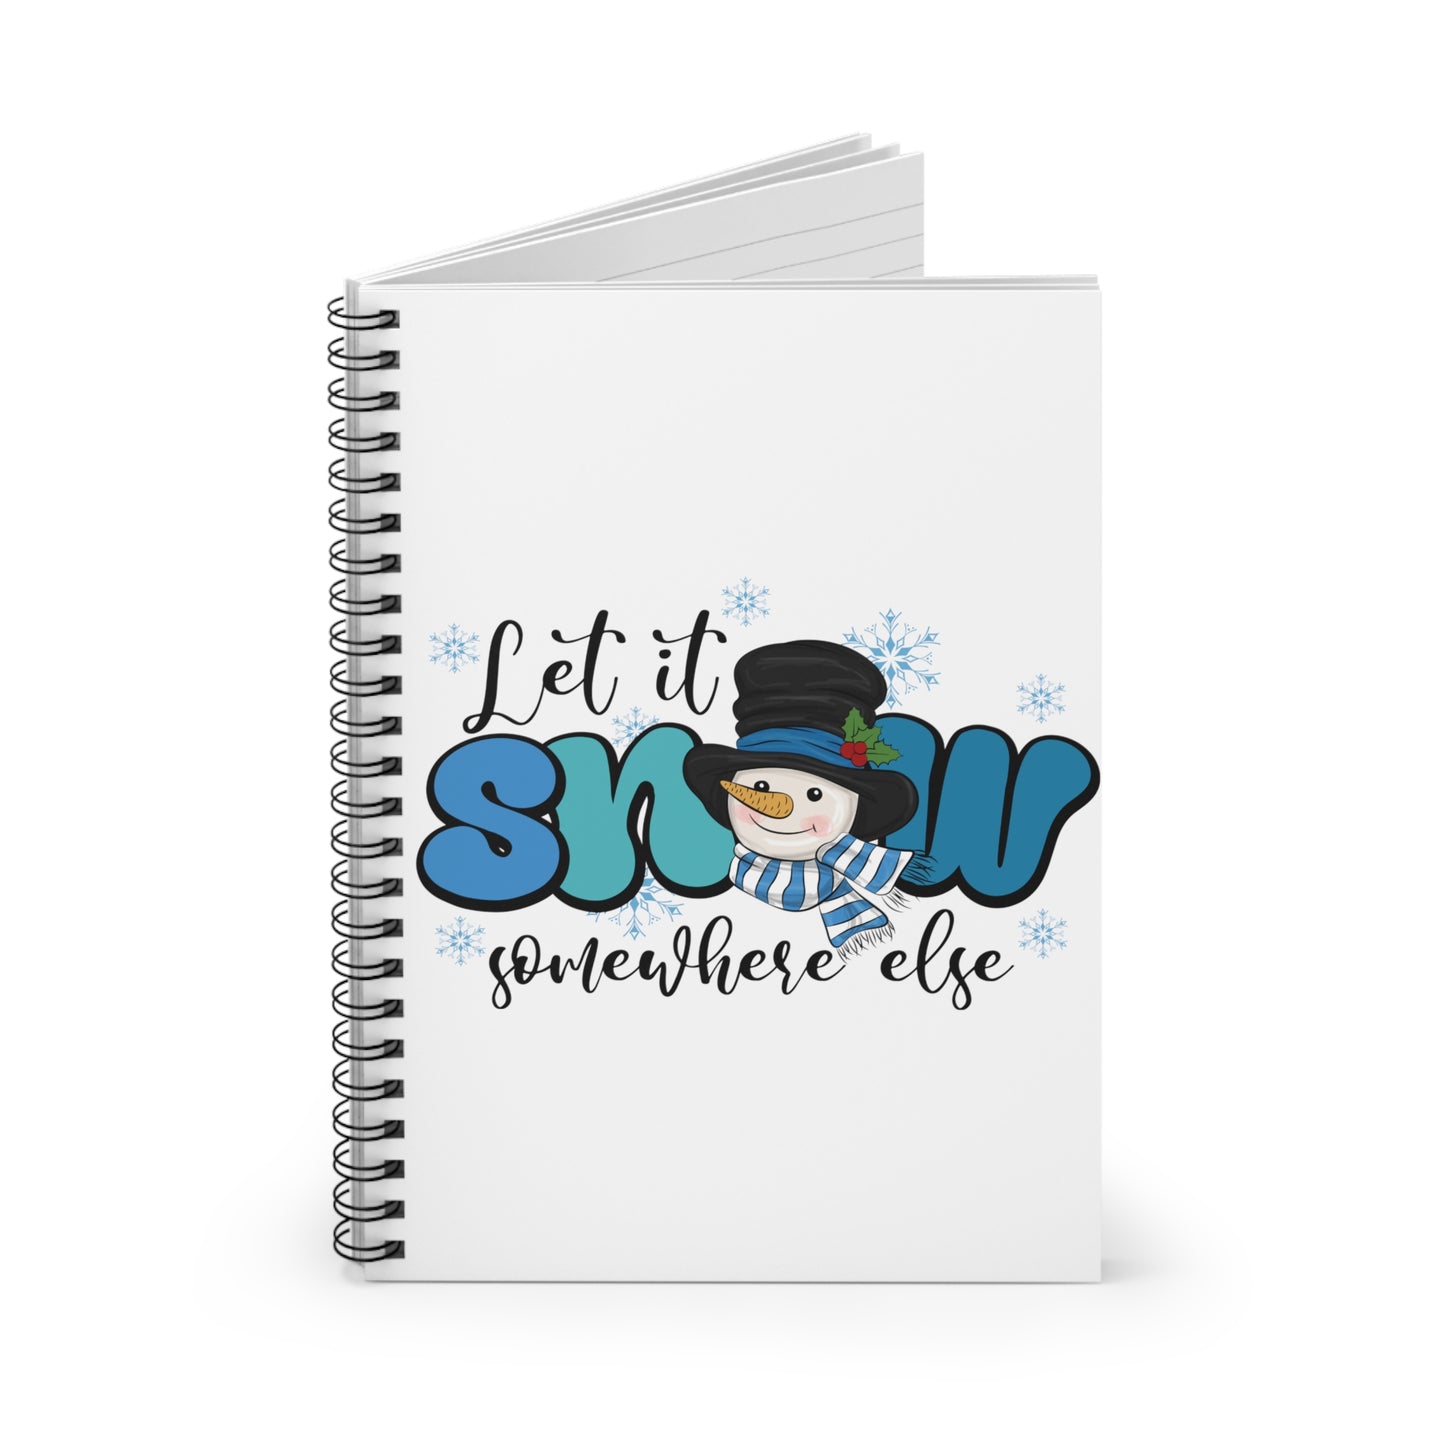 Let it Snow: Spiral Notebook - Log Books - Journals - Diaries - and More Custom Printed by TheGlassyLass